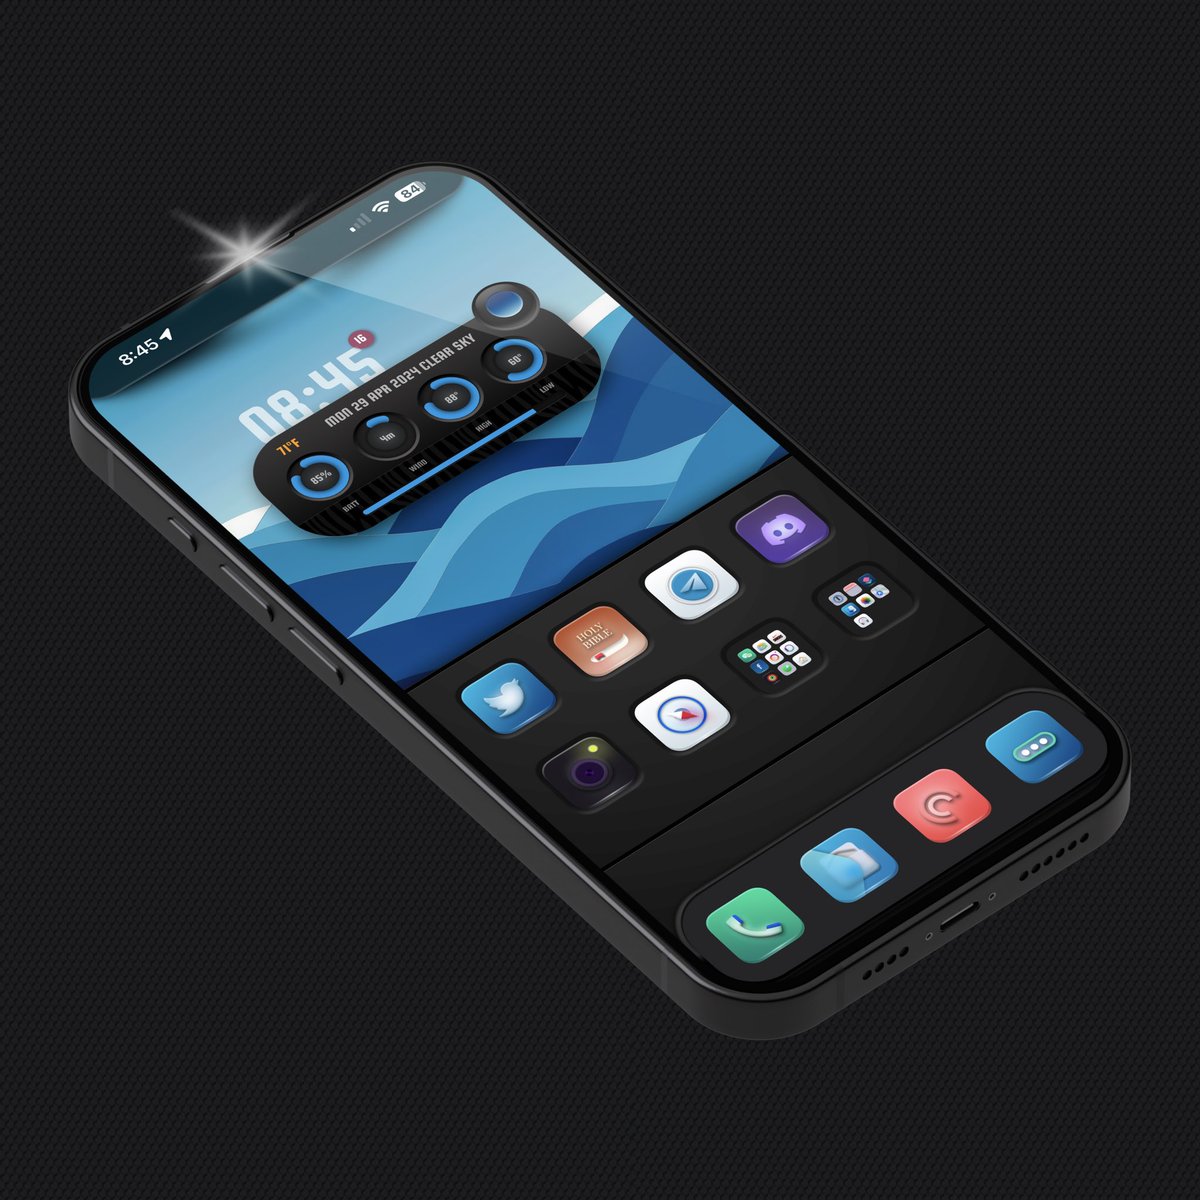 Check out #Glass by @Enter_Apps codeone88.github.io/Glass/ Use Ⓜ️ by @SeanKly for custom walls 👉🏼 apple.co/3Q5ajT9 #Apple #iOS1741 #iPhone15PM #NoJailBreak #Widgy #MockupM #ShowAE @SeanKly @TeboulDavid1 @Enter_Apps @SteveMeyer420 @Attairdu57slm @timetravelr2025